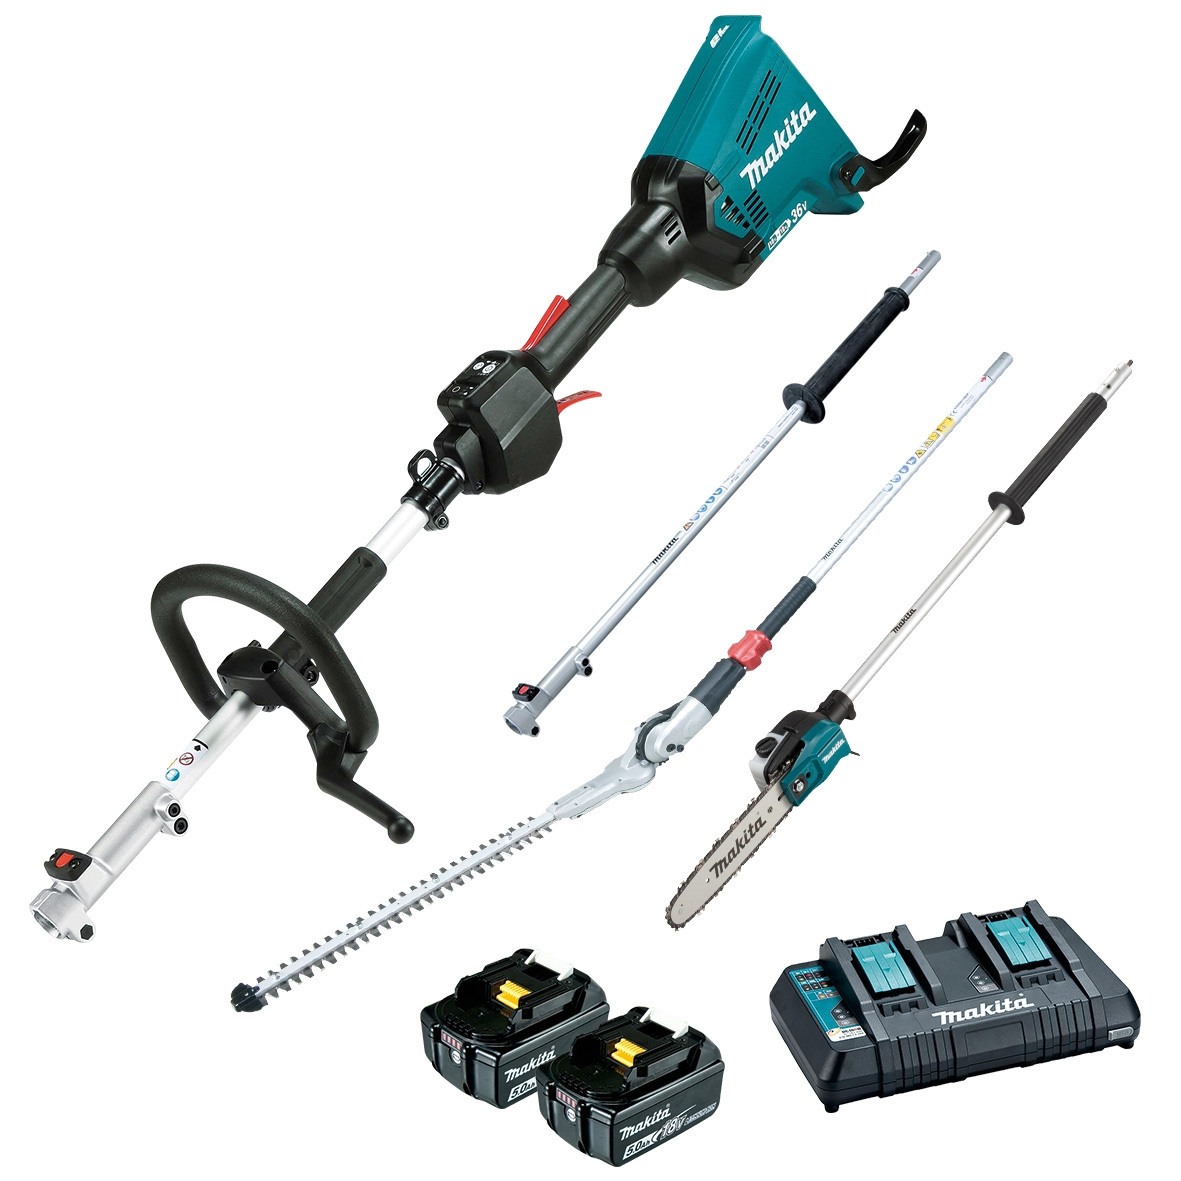 Makita 18Vx2 Brushless Multi-Function Power Head with Attachments 5.0Ah Kit DUX60PSHPT2